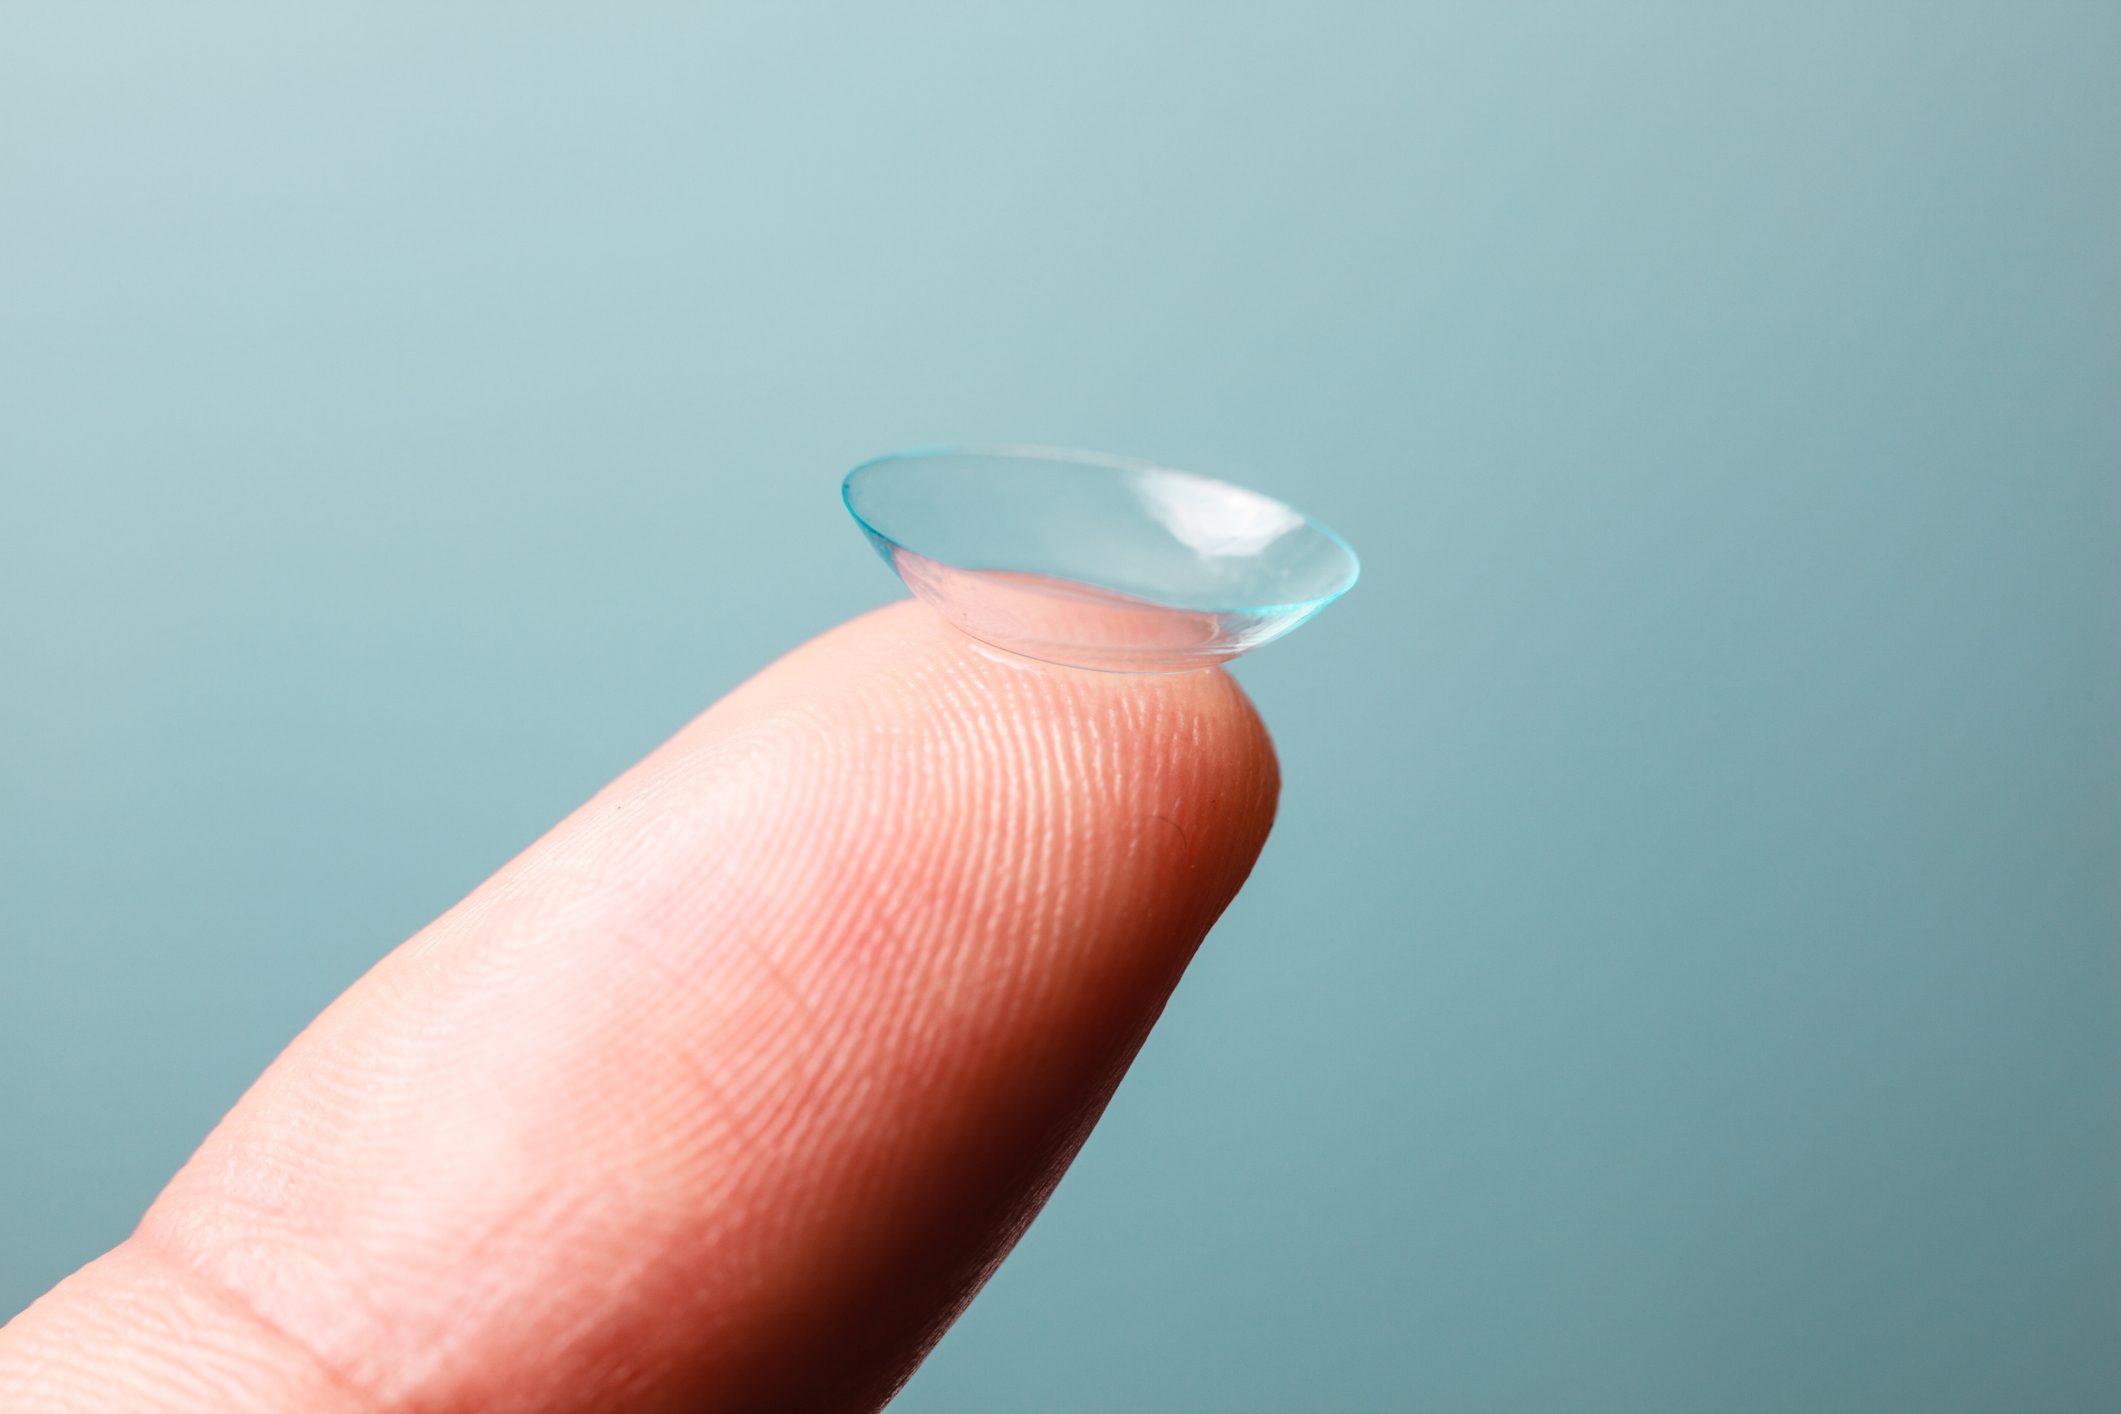 Contact lens balance on the tip of index finger